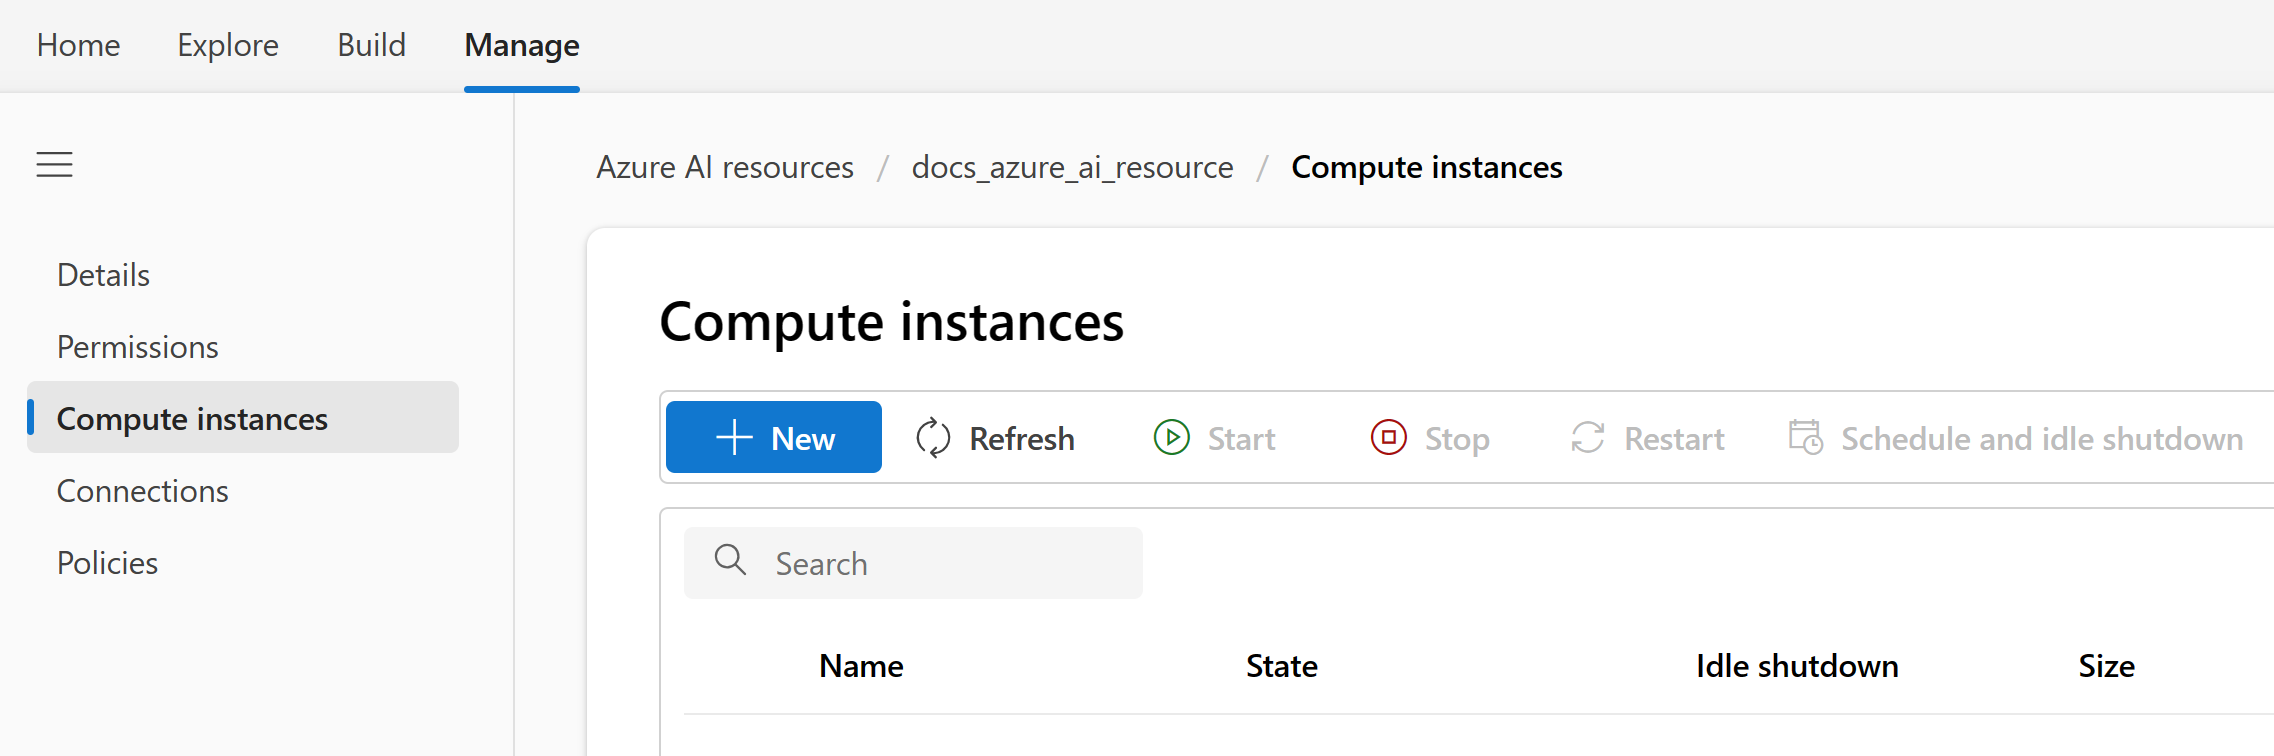 Screenshot of the option to create a new compute instance from the manage page.